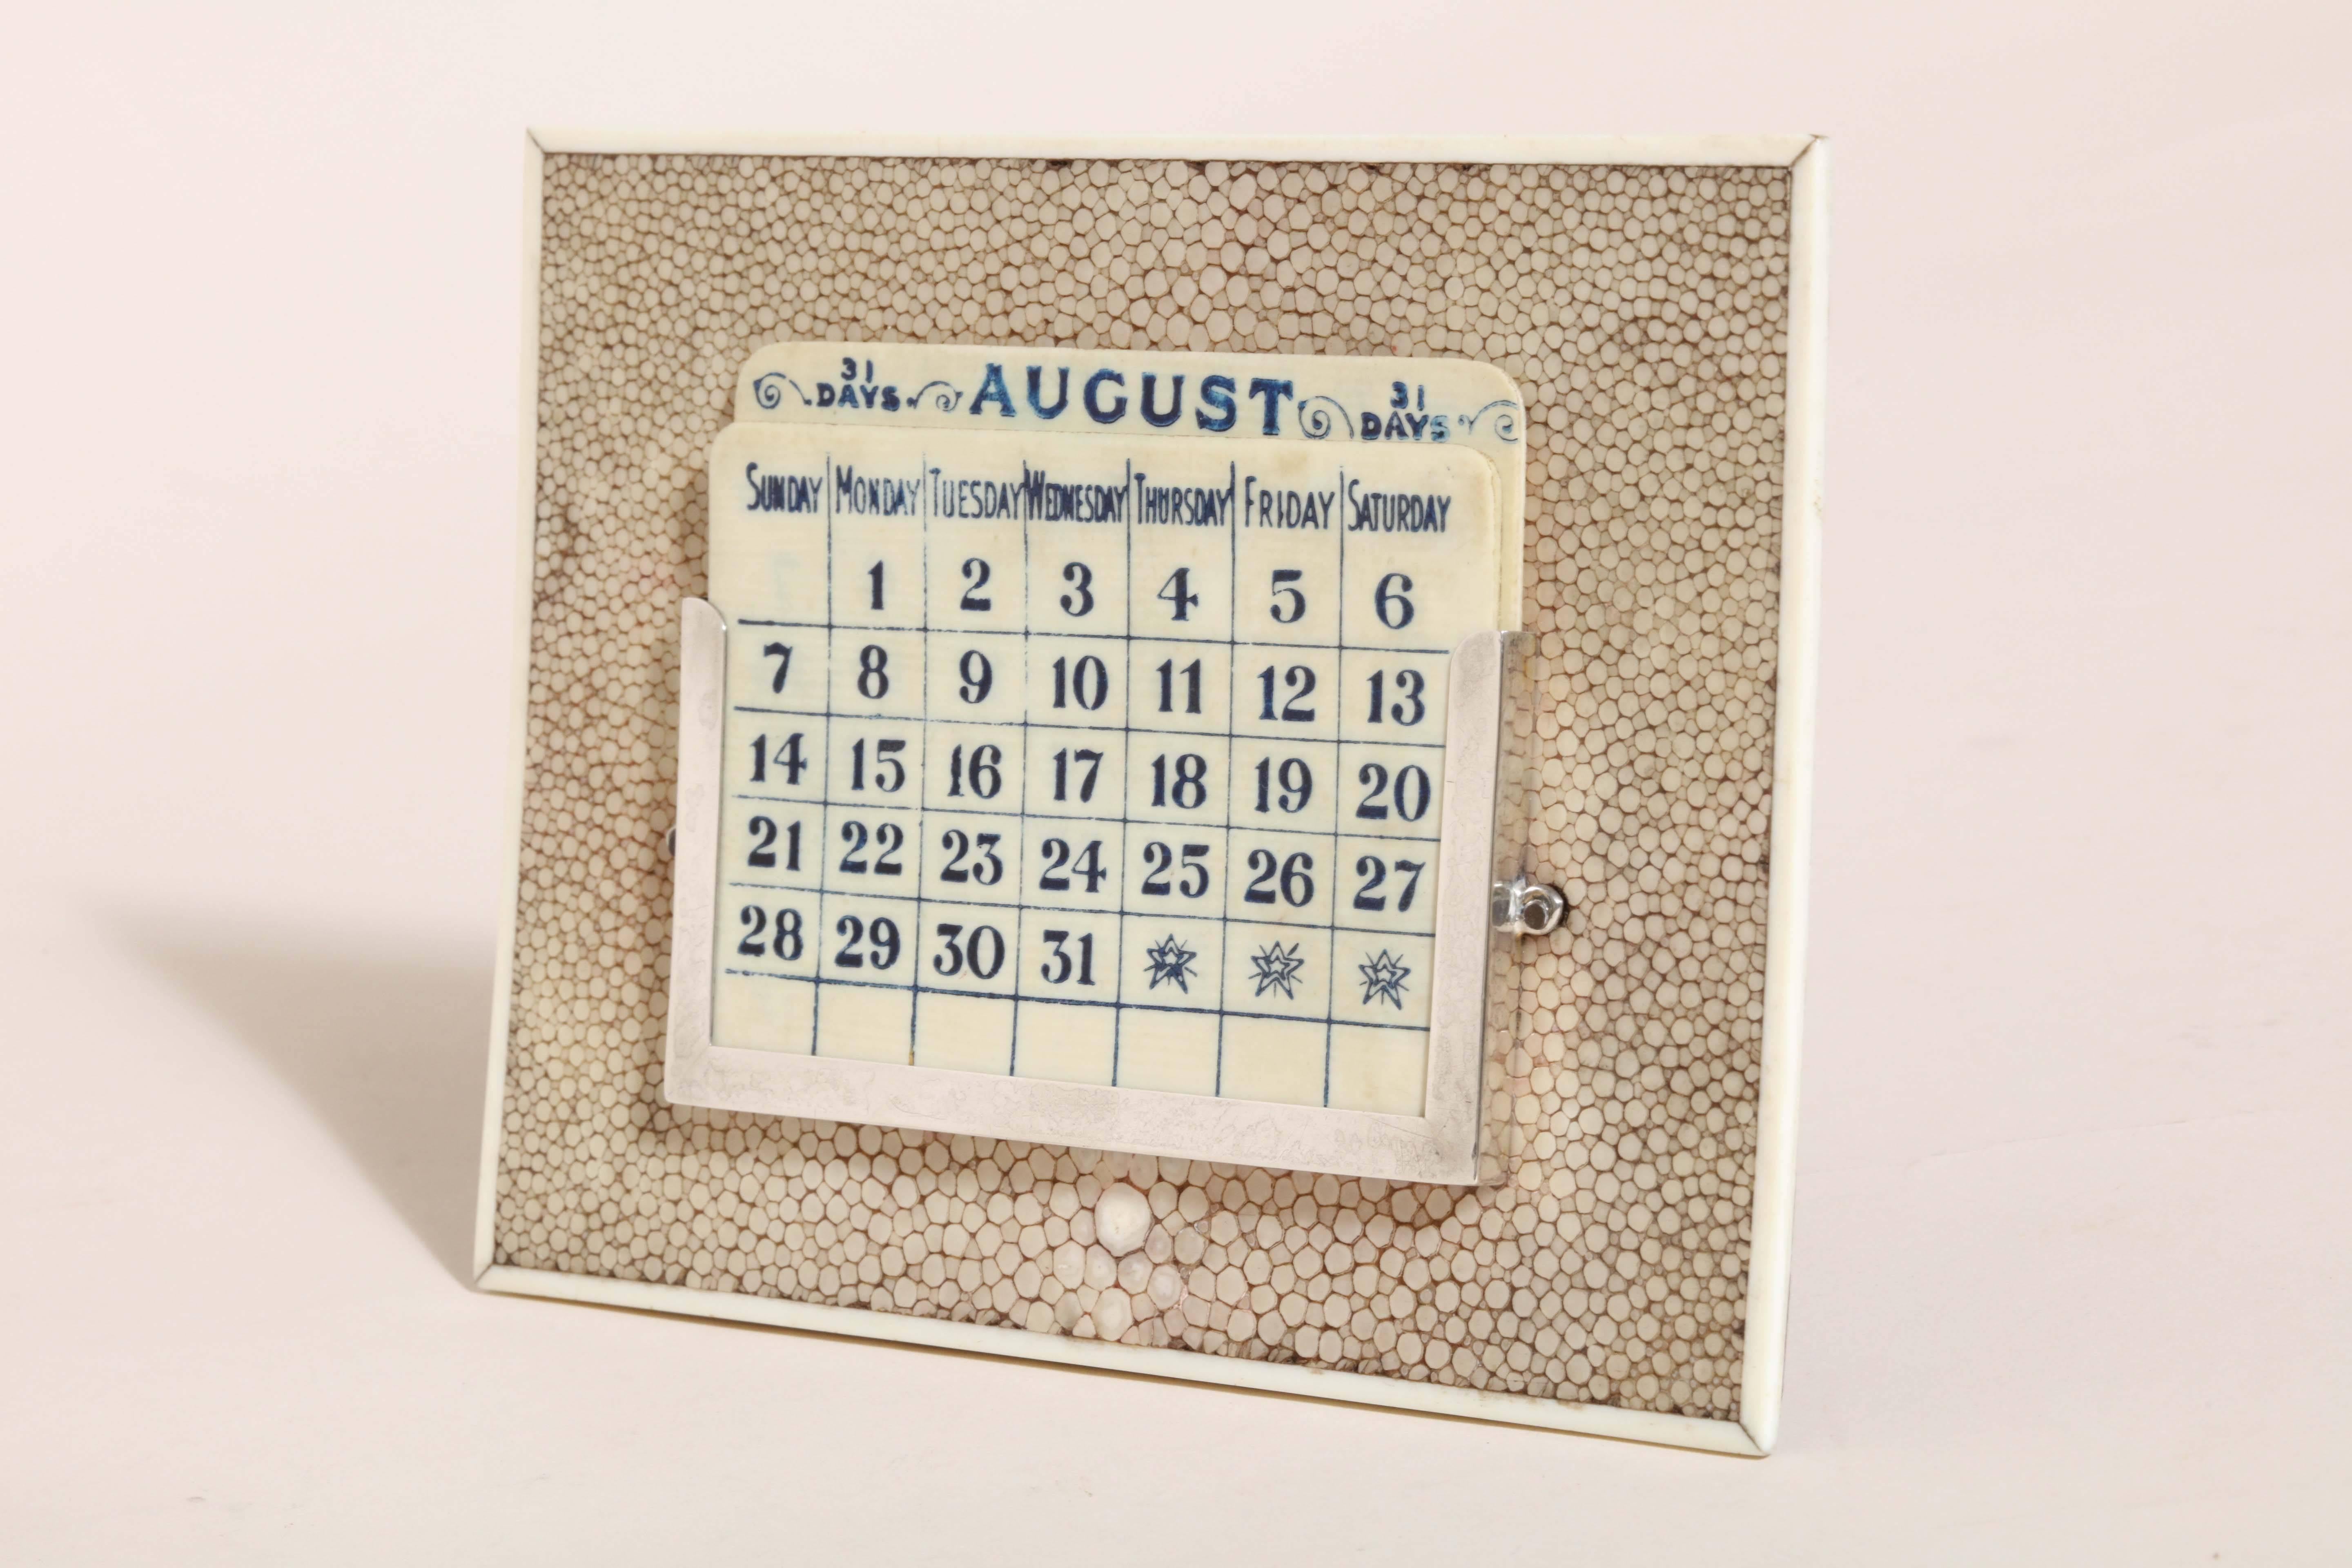 Perpetual calendar with month cards in sterling silver holder mounted on beige shagreen stand with bone border. All cards are present.

Impressed for 925 silver/ London/ 1924/ G B S.